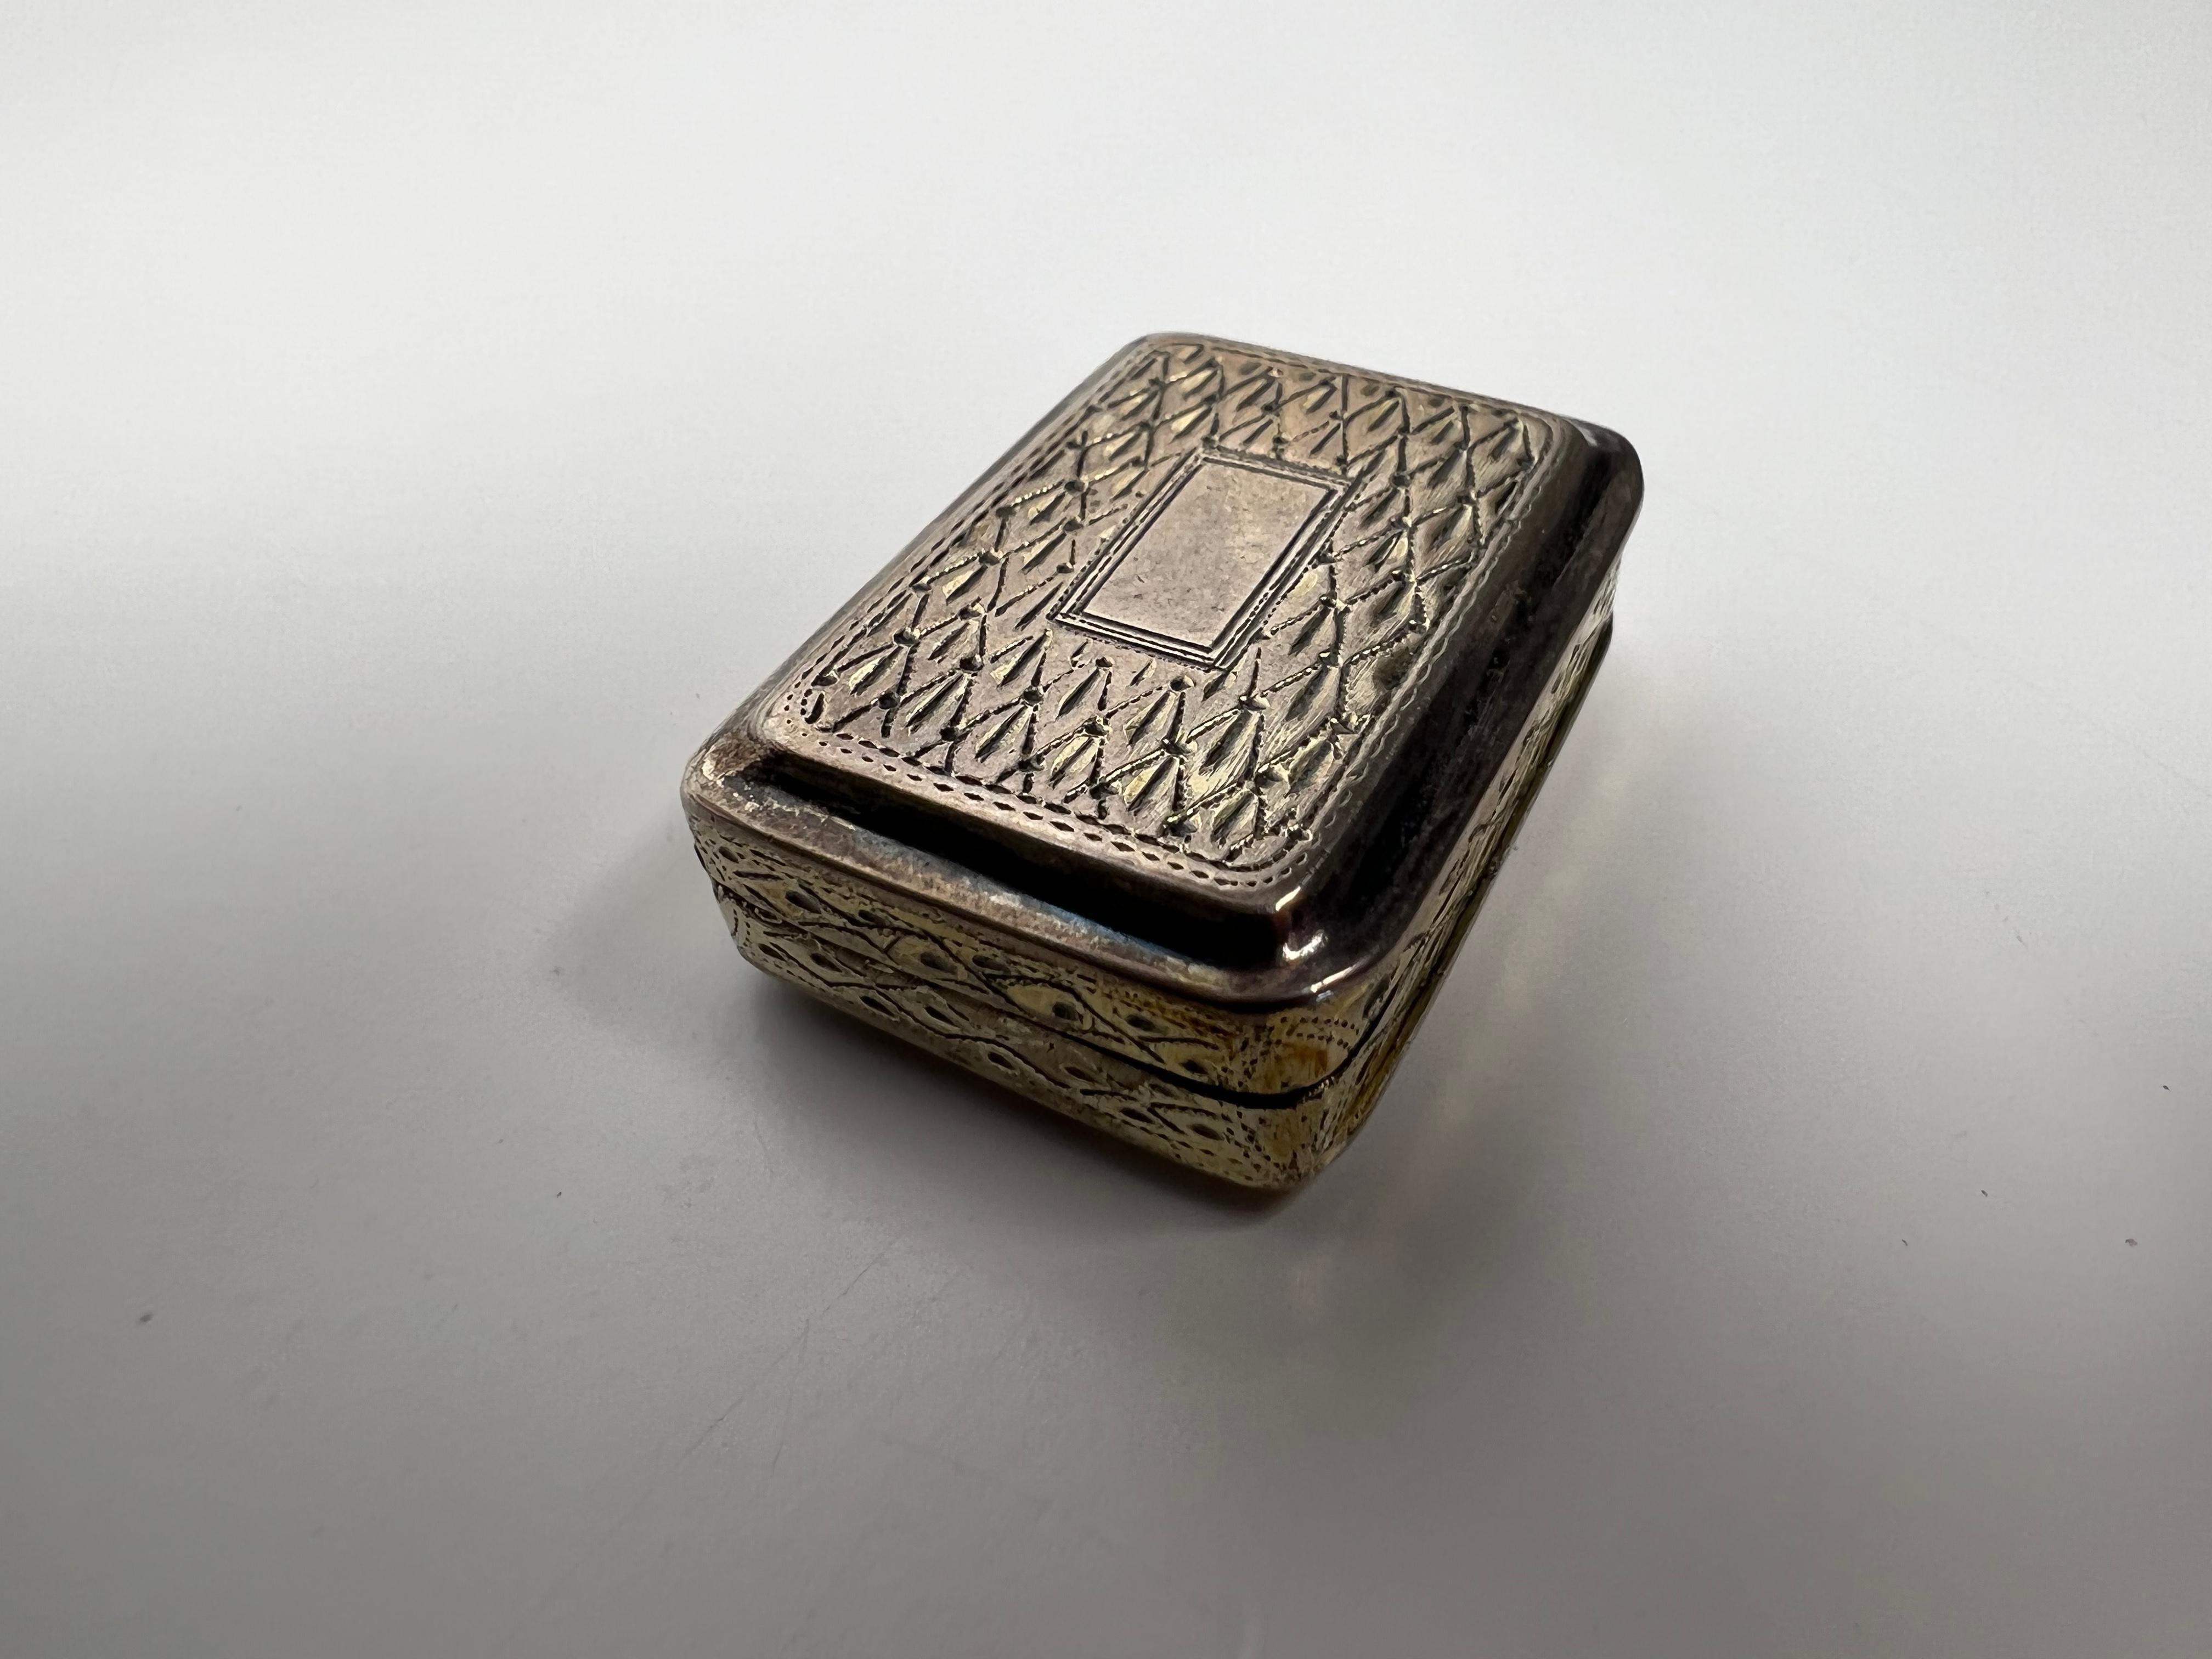 Early 19th century sterling silver vinaigrette made in Birmingham England circa 1813. Sterling silver vinaigrettes were used during the Victorian era by soaking a small sponge with perfume or aromatic vinegar to compensate many of the bad odors of